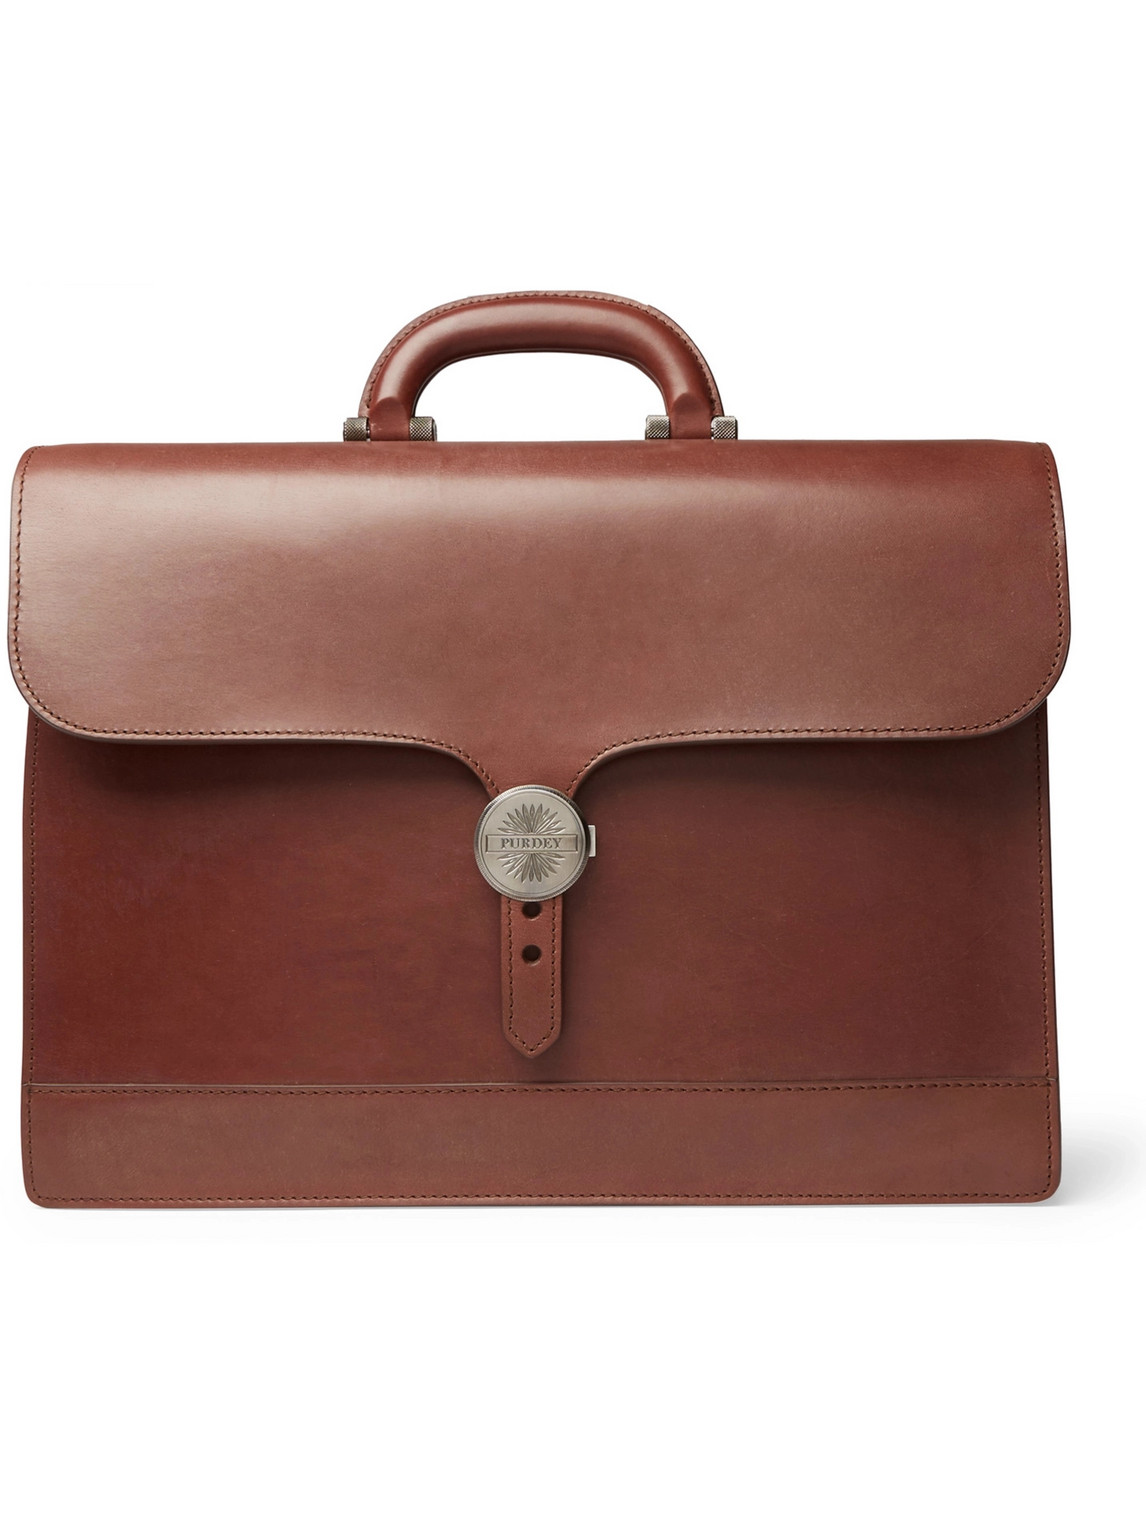 JAMES PURDEY & SONS AUDLEY LEATHER BRIEFCASE